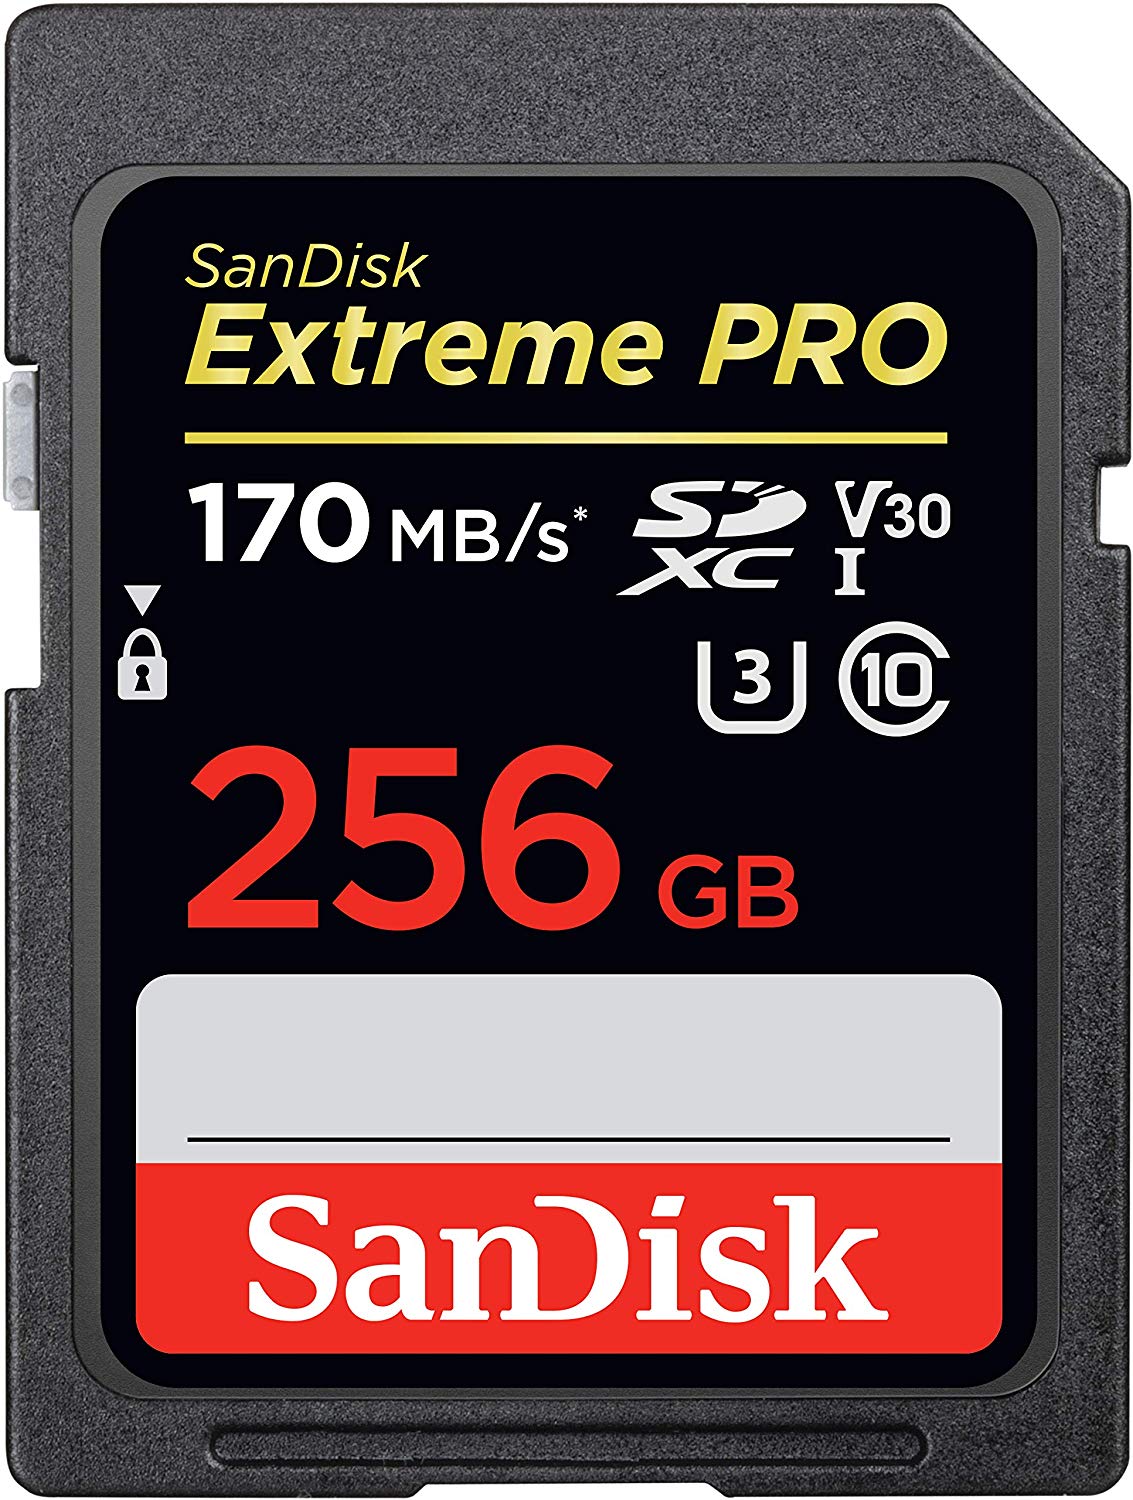 Sandisk Extreme Pro - Best Gifts for Photographers